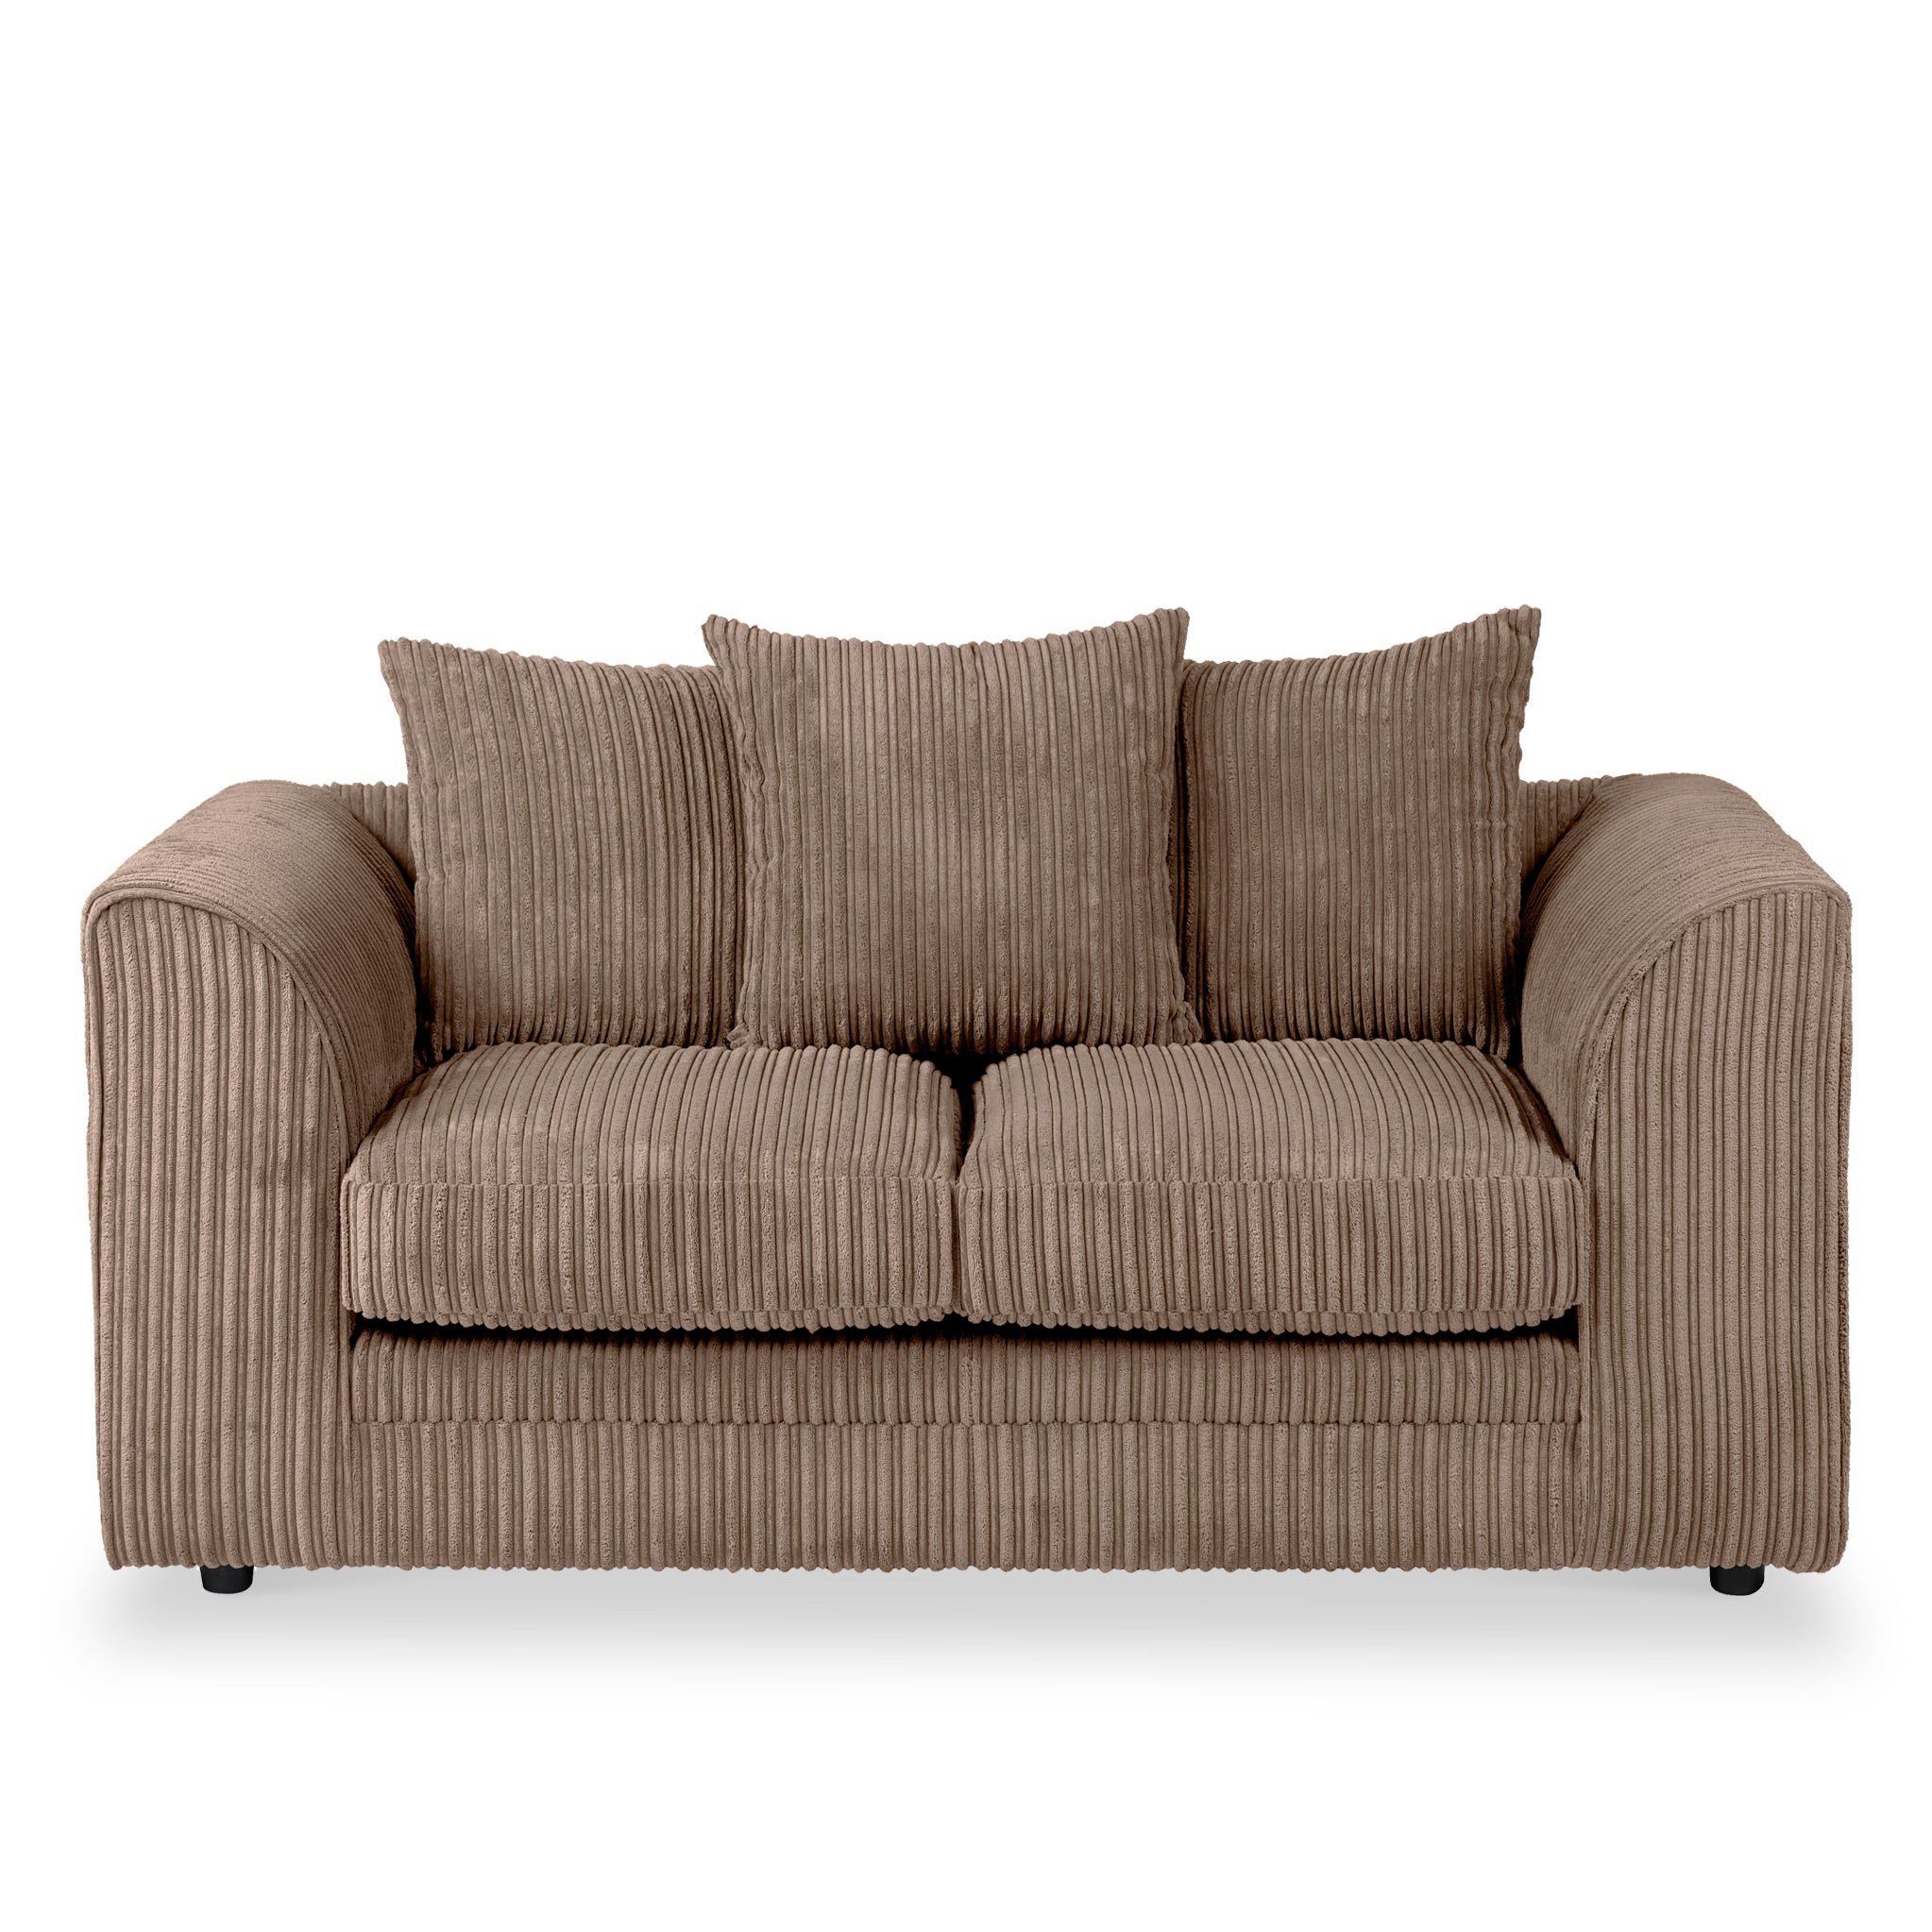 Bletchley 2 Seater Jumbo Cord Fabric Scatter Sofa Roseland